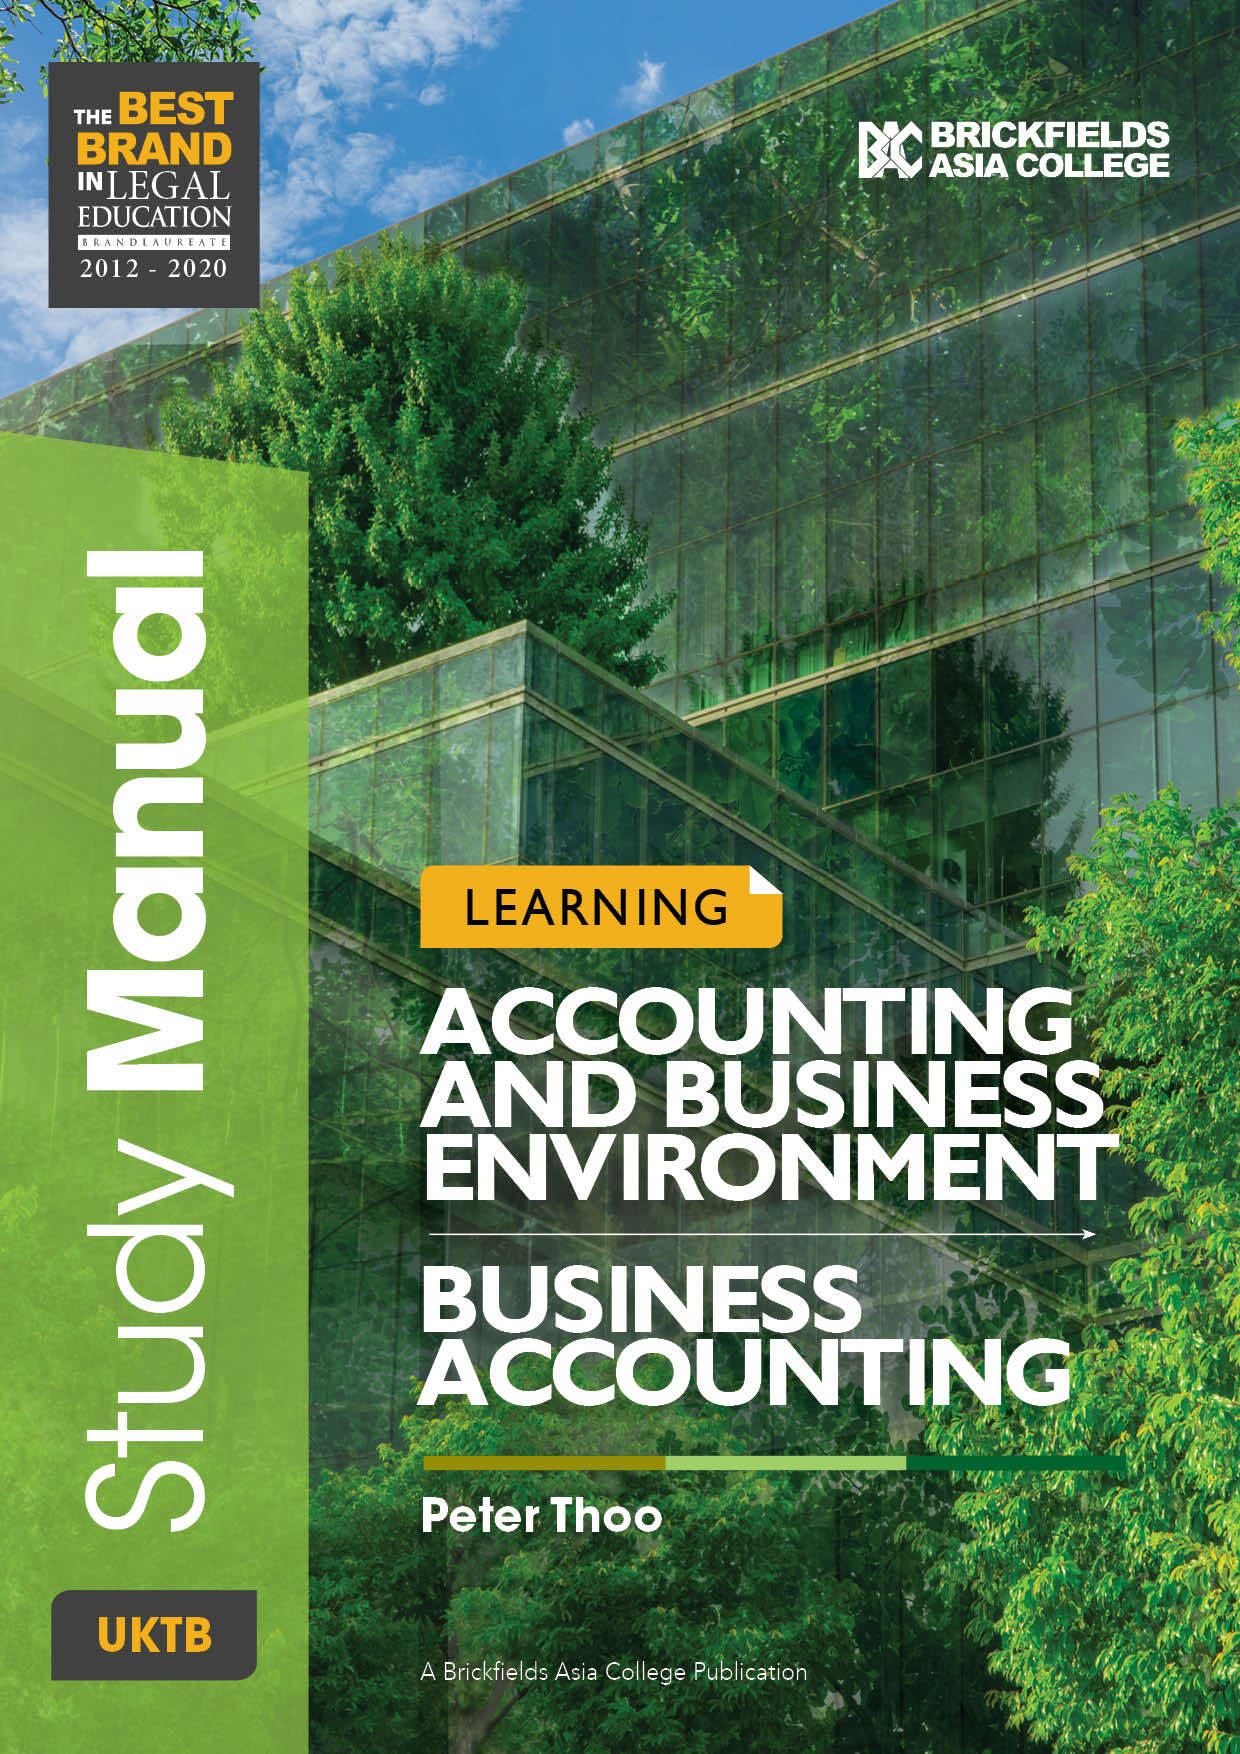 CVR_UKTB_SM_ACCOUNTING AND BUSINESS ENVIRONMENT_BUSINESS ACCOUNTING_2021